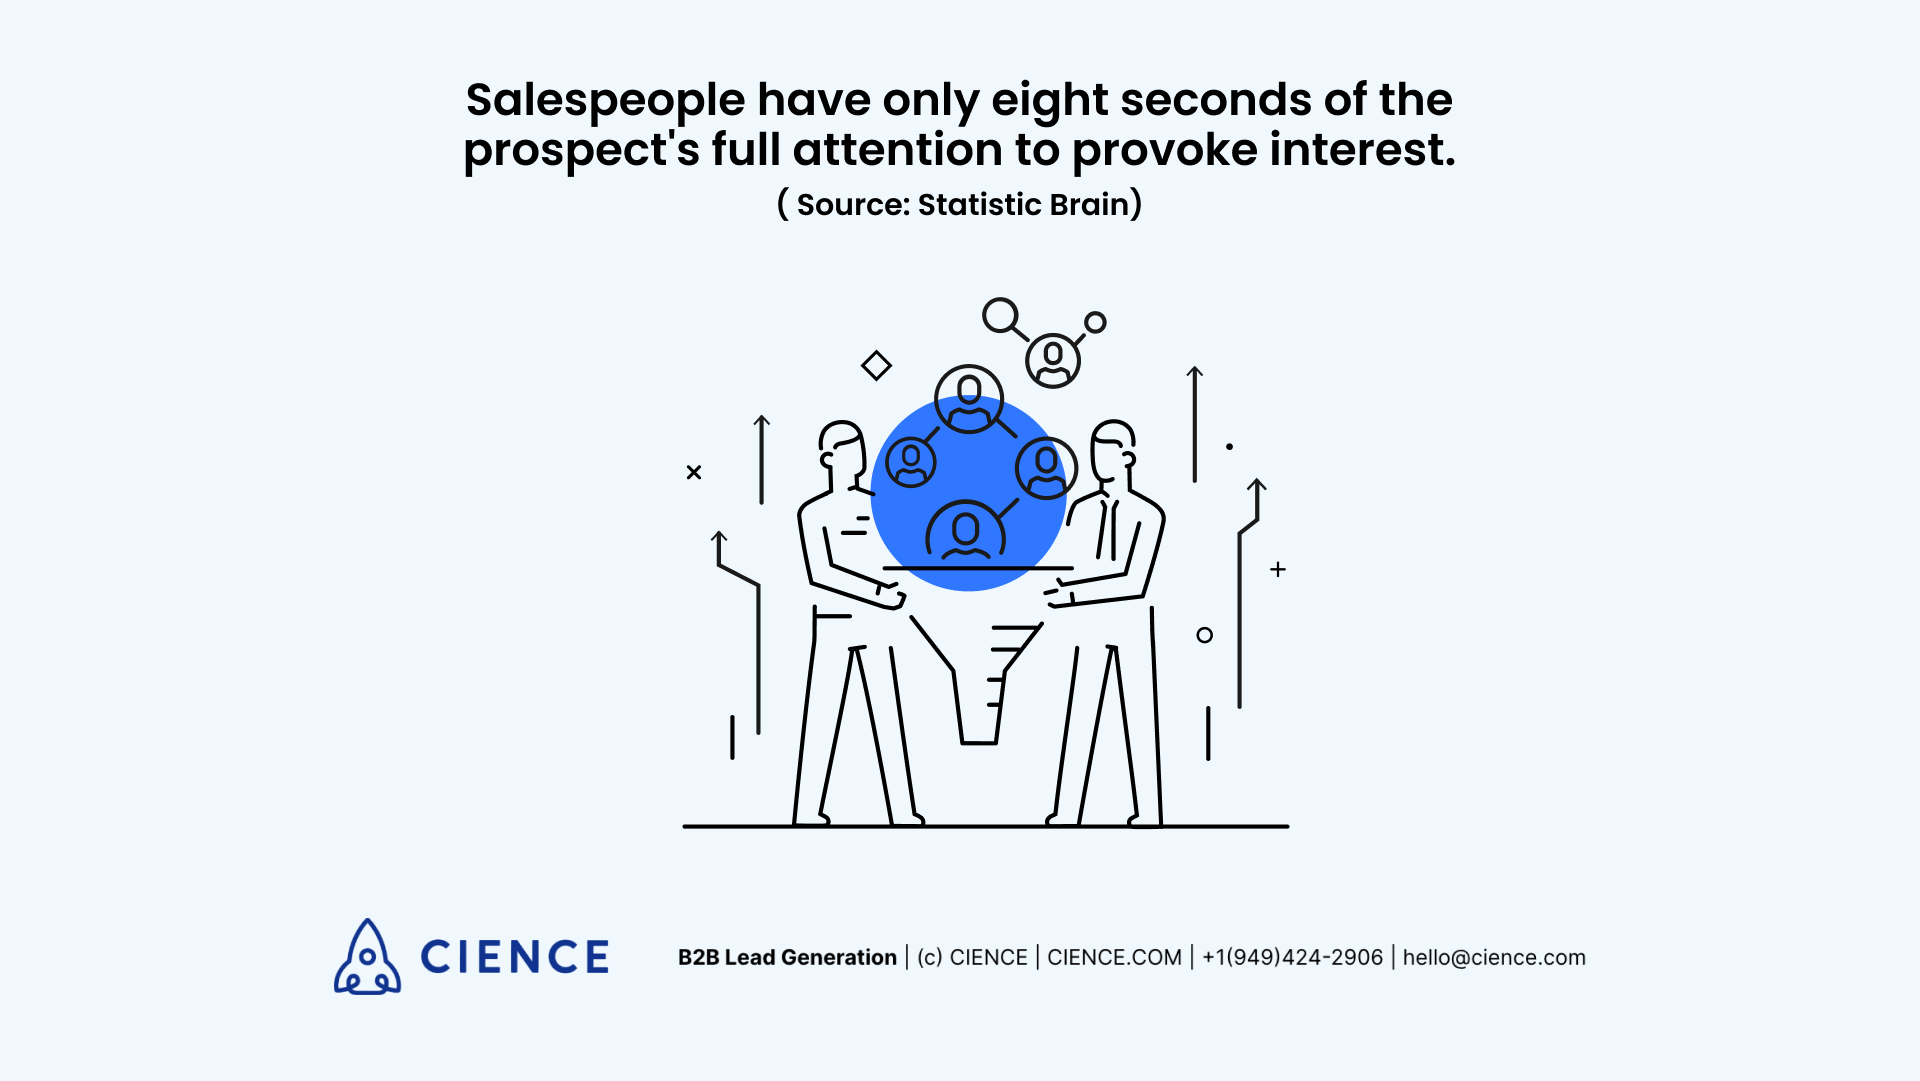 Salespeople have only eight seconds of the prospect's full attention to provoke interest